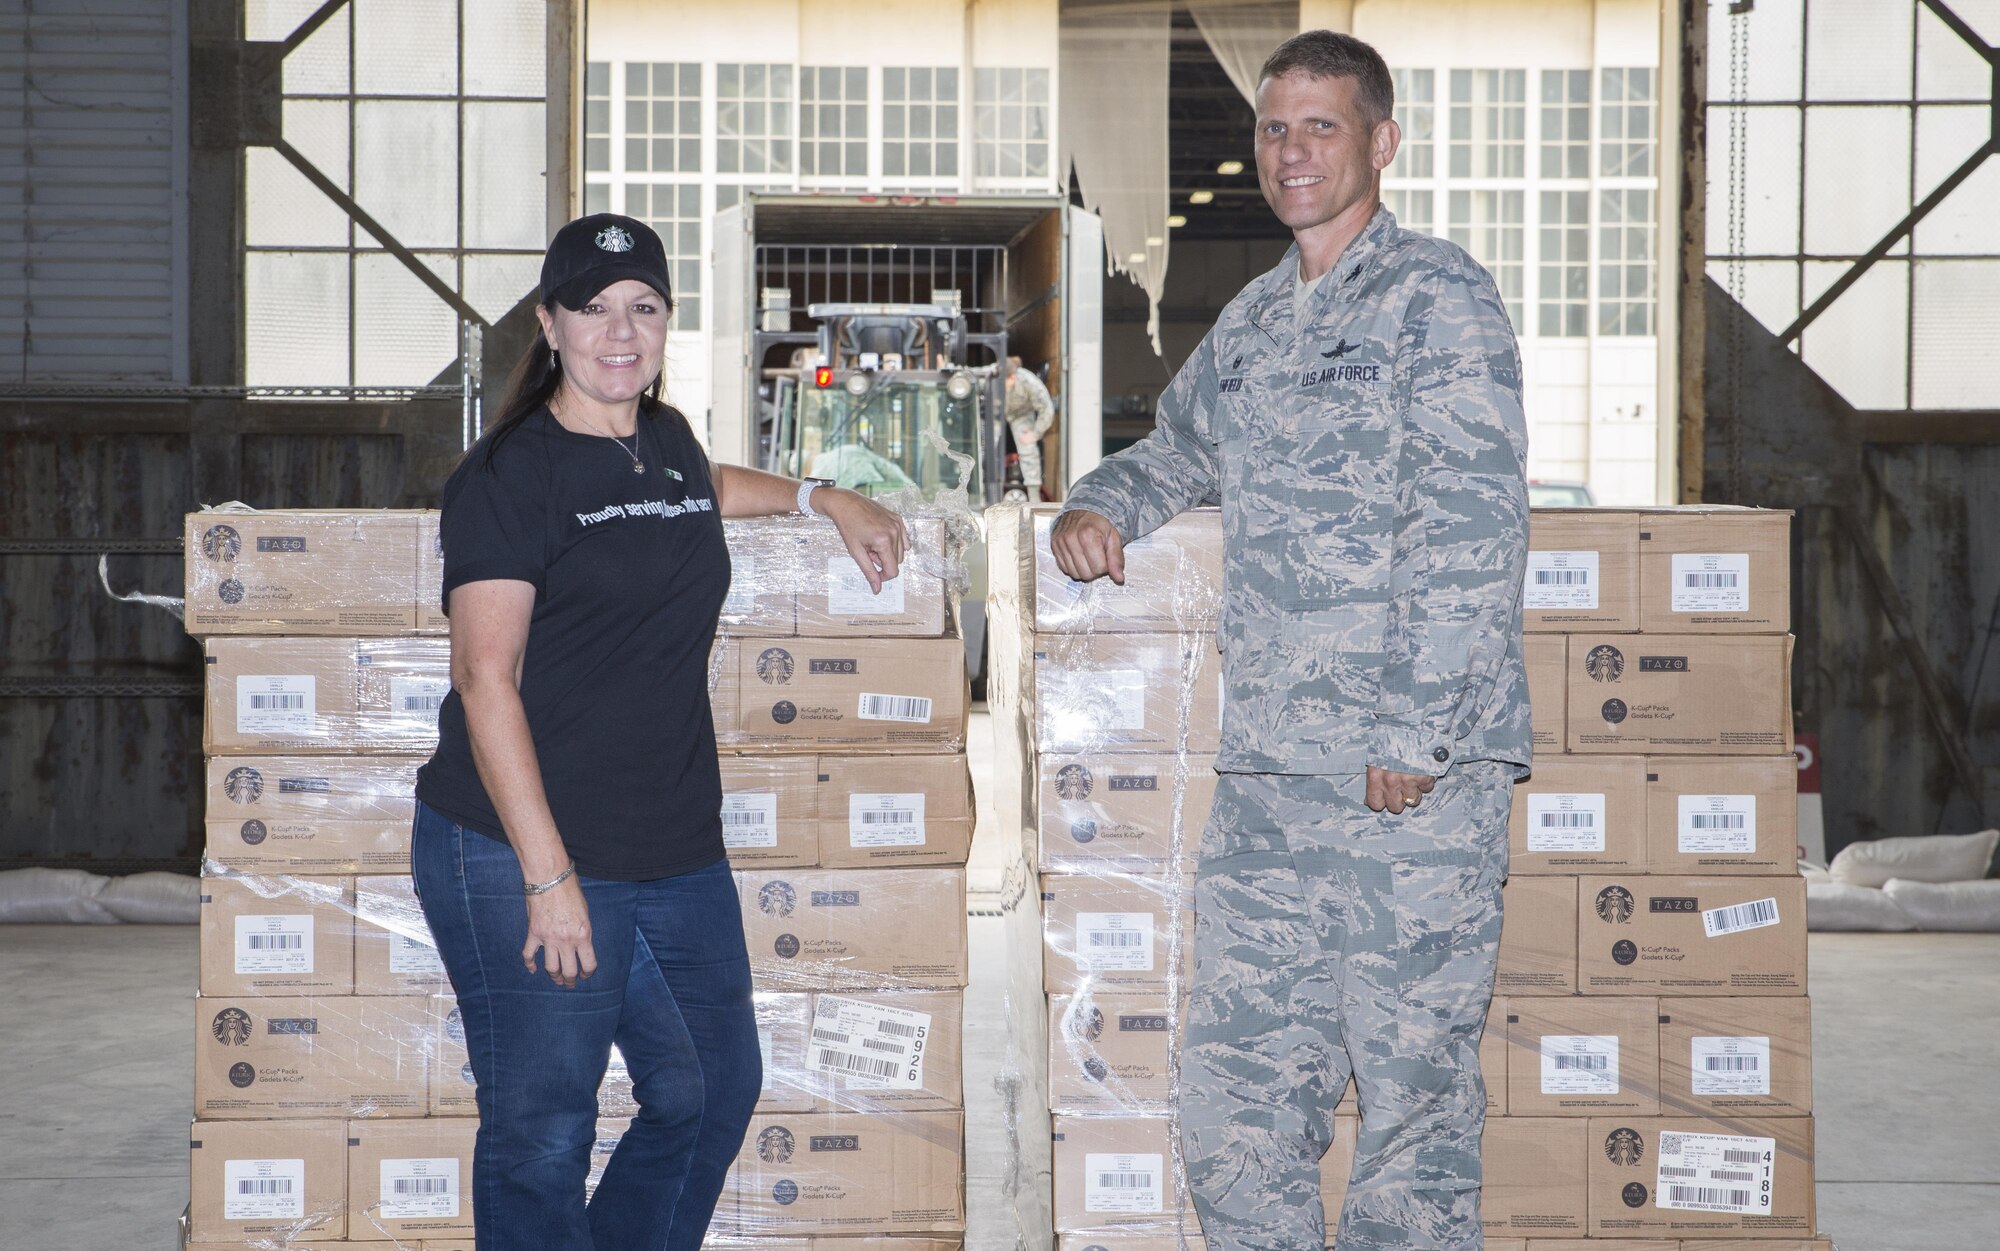 433rd Airlift Wing members seperate flavors of coffee from one of 7 pallets that were donatd to the Alamo Wing,  October 10, 2017 at Joint Base San Antonio-Lackland, Texas.